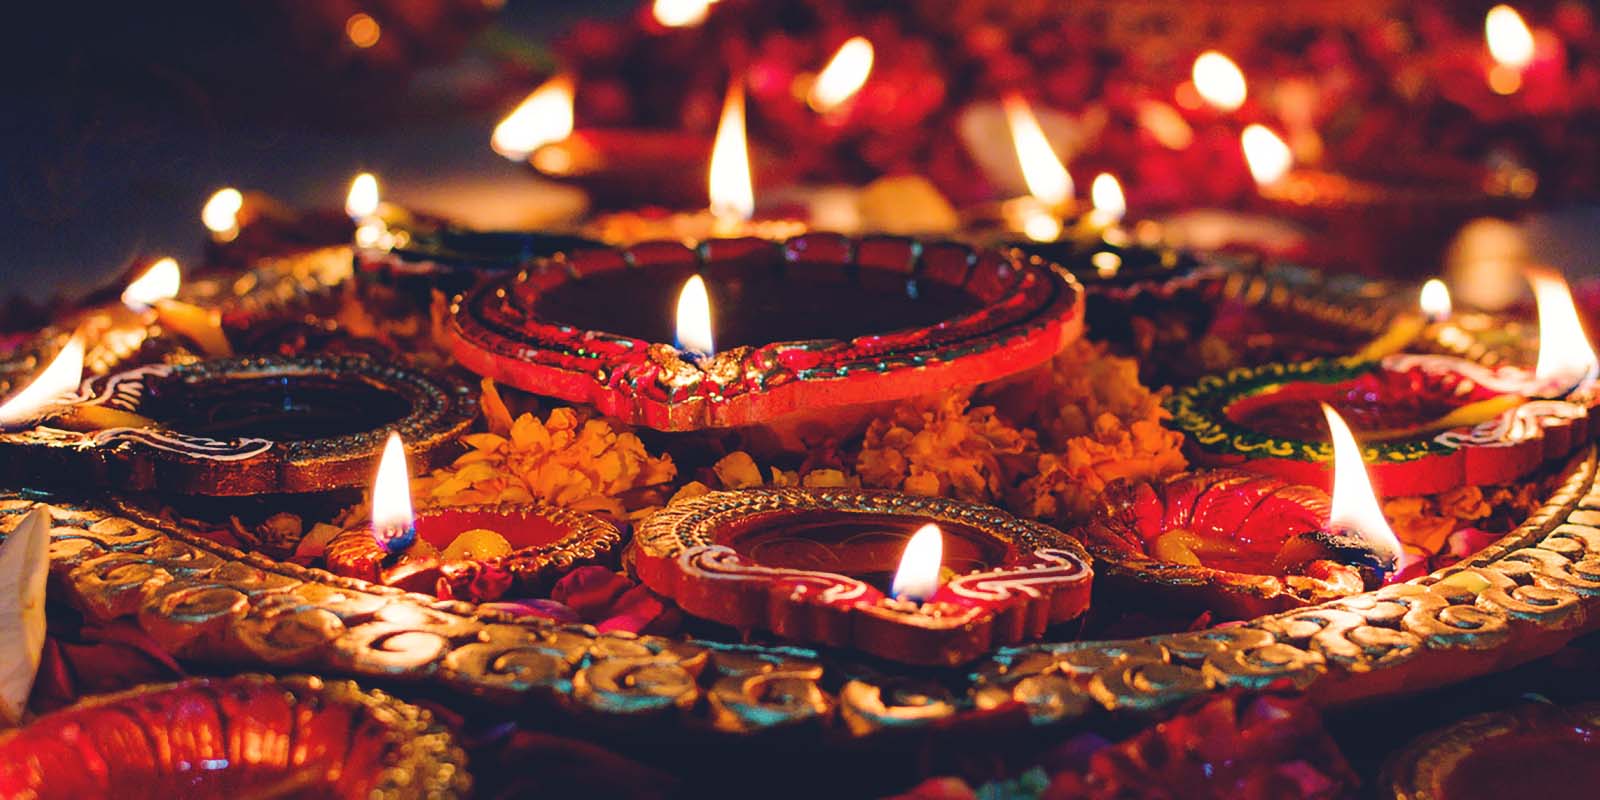 Where does the name ‘Diwali’ come from?